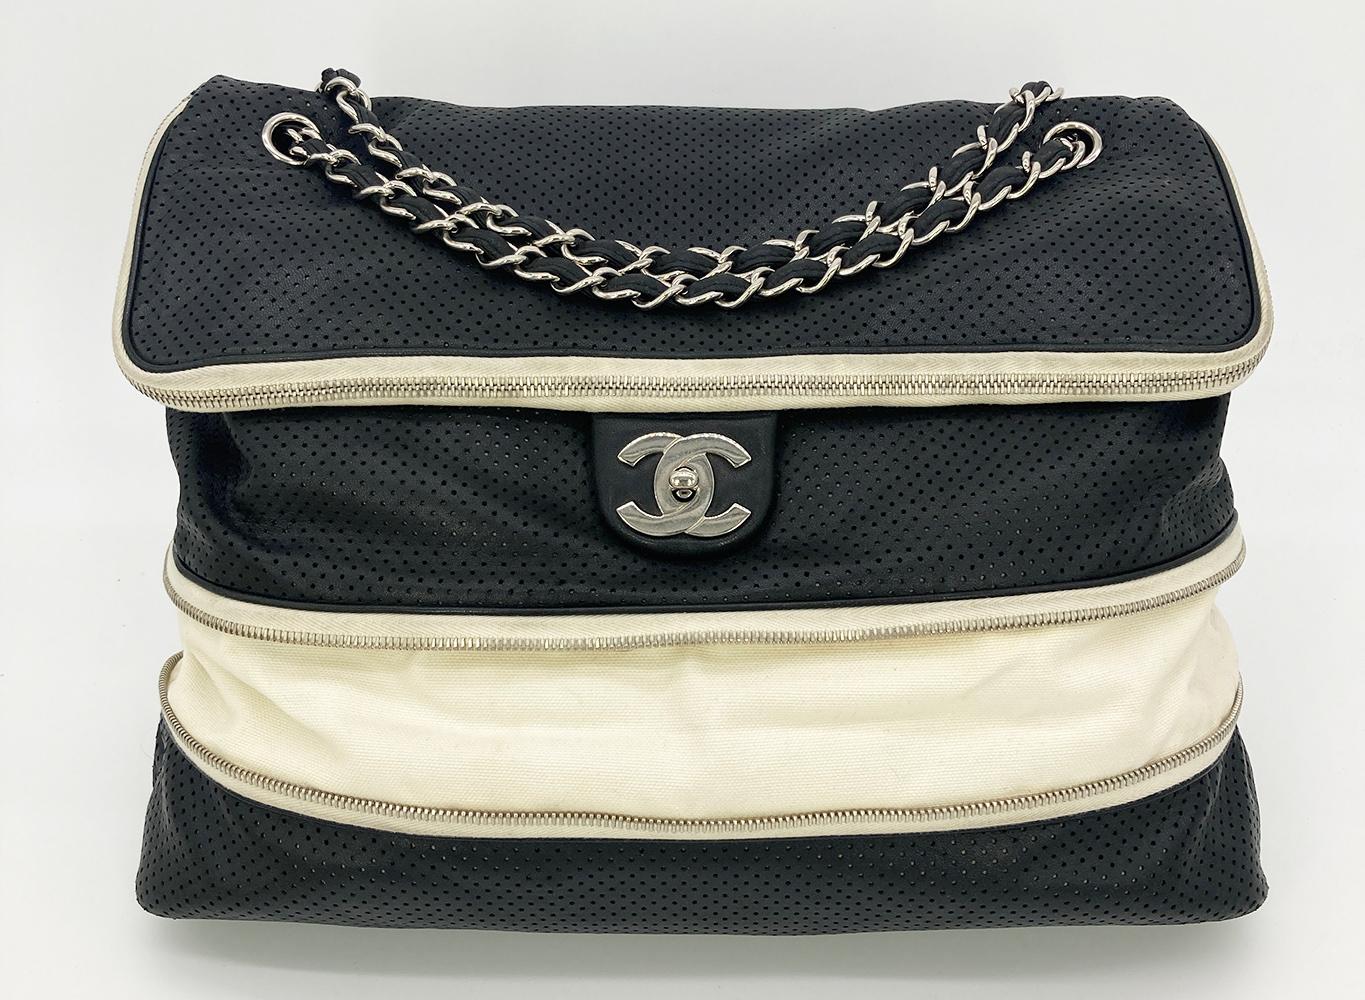 Chanel Black Perforated Leather Expandable Classic Flap Shoulder Bag For Sale 4